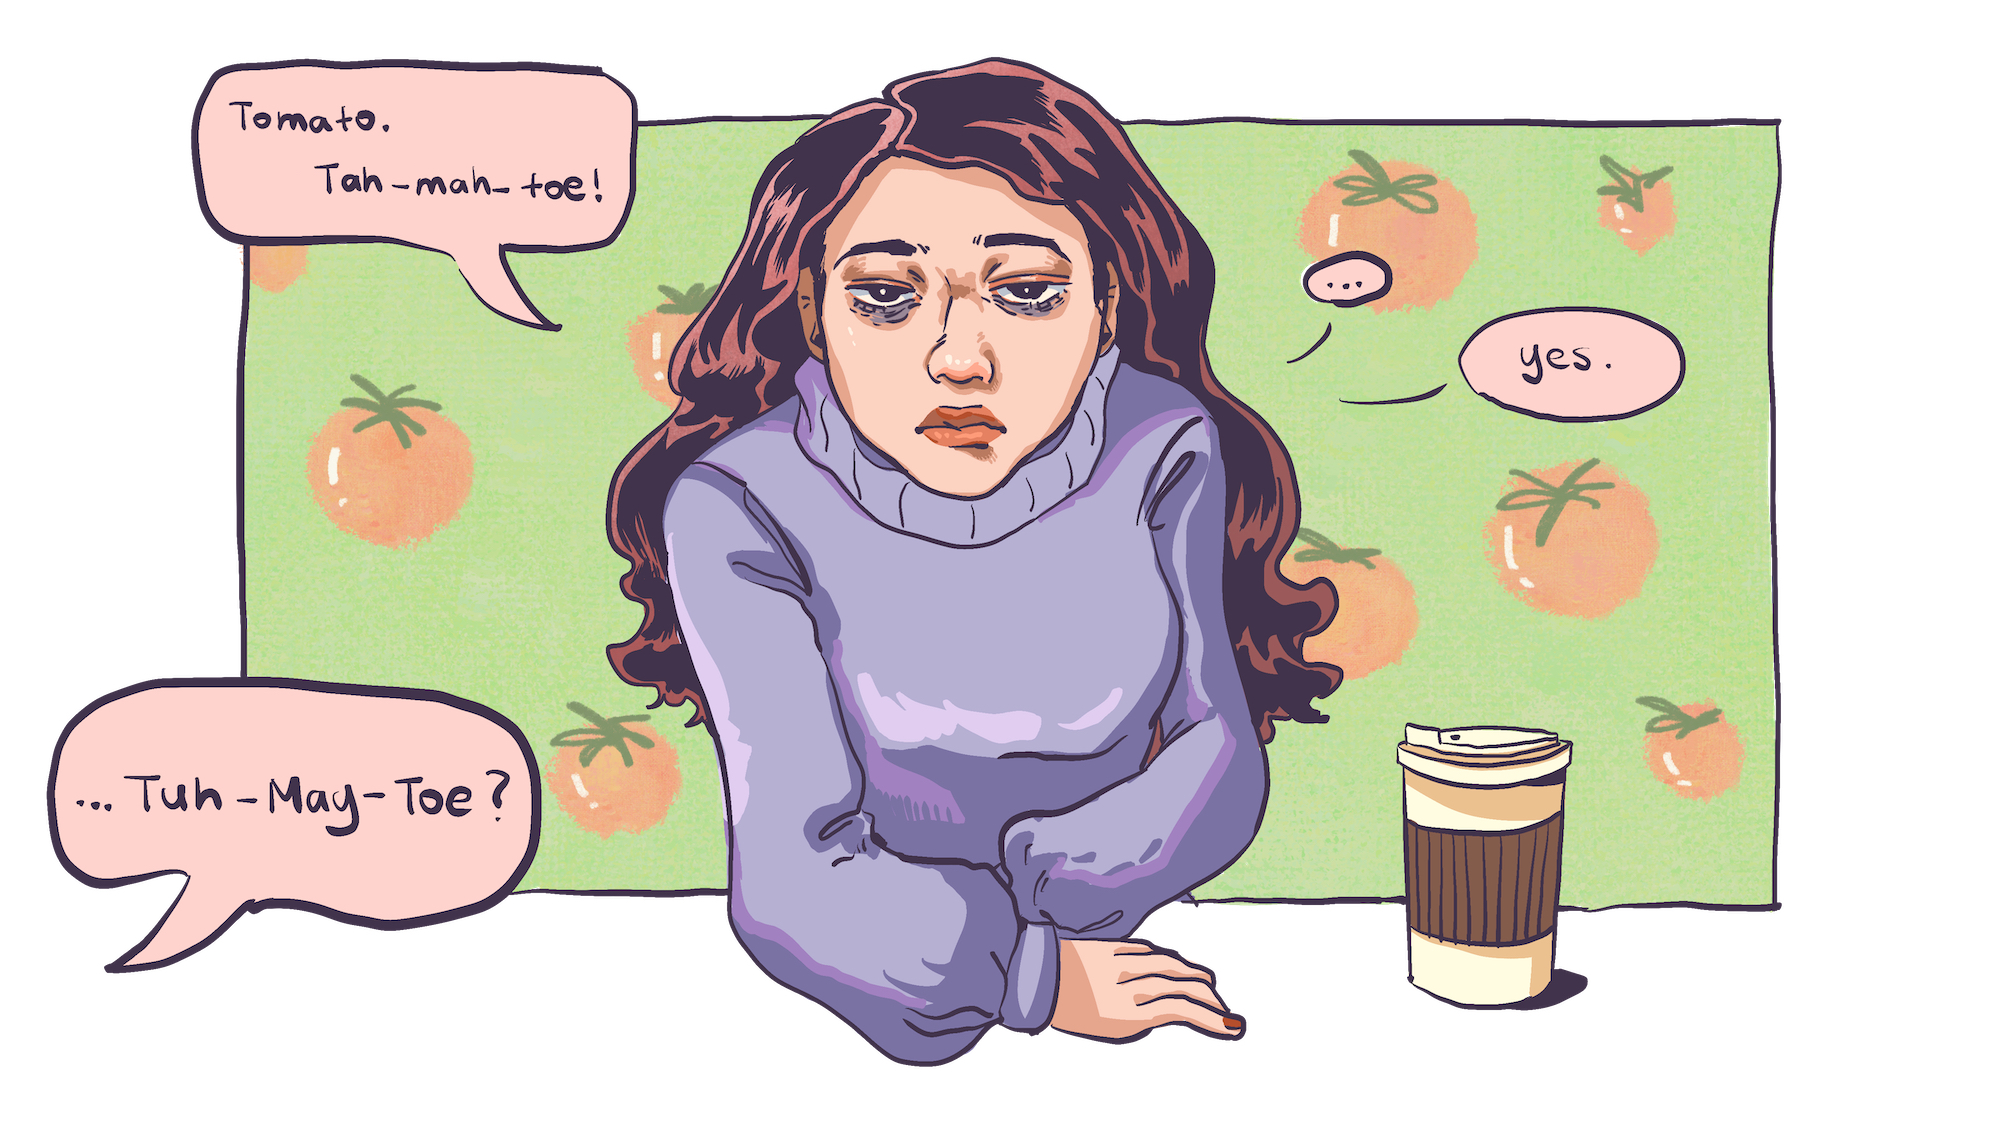 illustration of a tired girl sitting with her arms crossed with speech bubbles showing her trying to say the word ‘tomato’